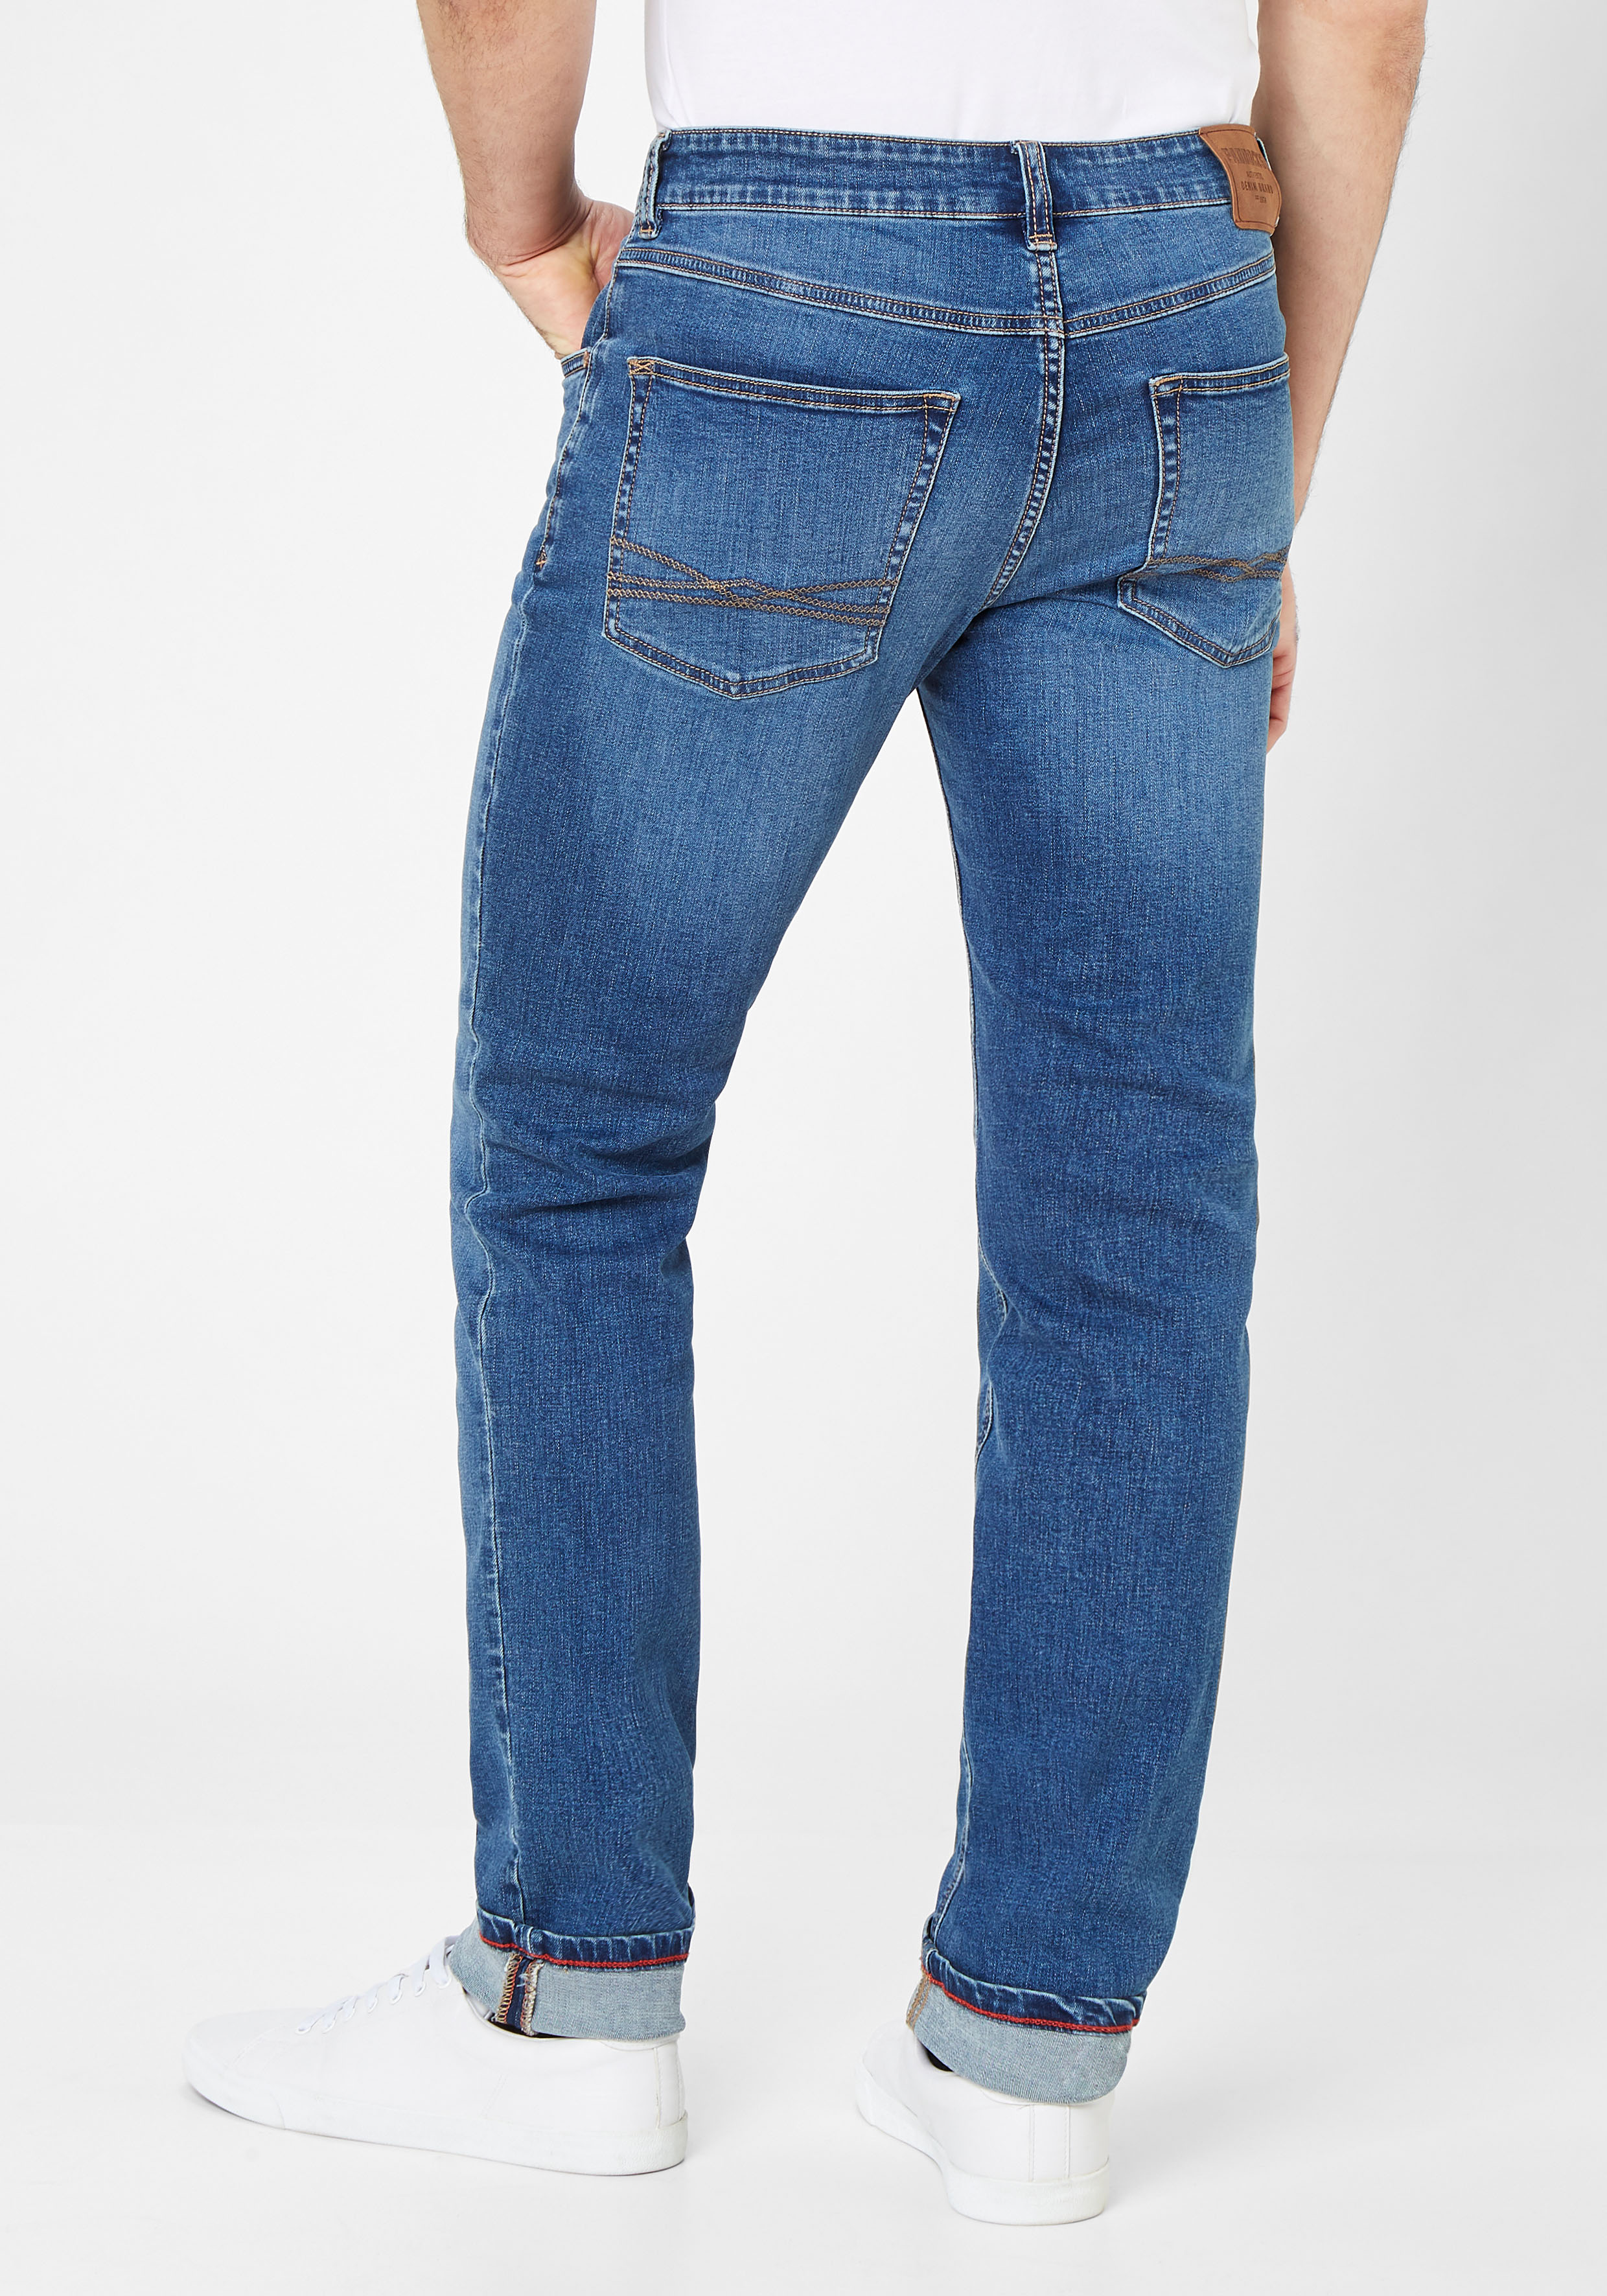 Paddock's Ben Jeans Tapered Fit blue stone use extra lang